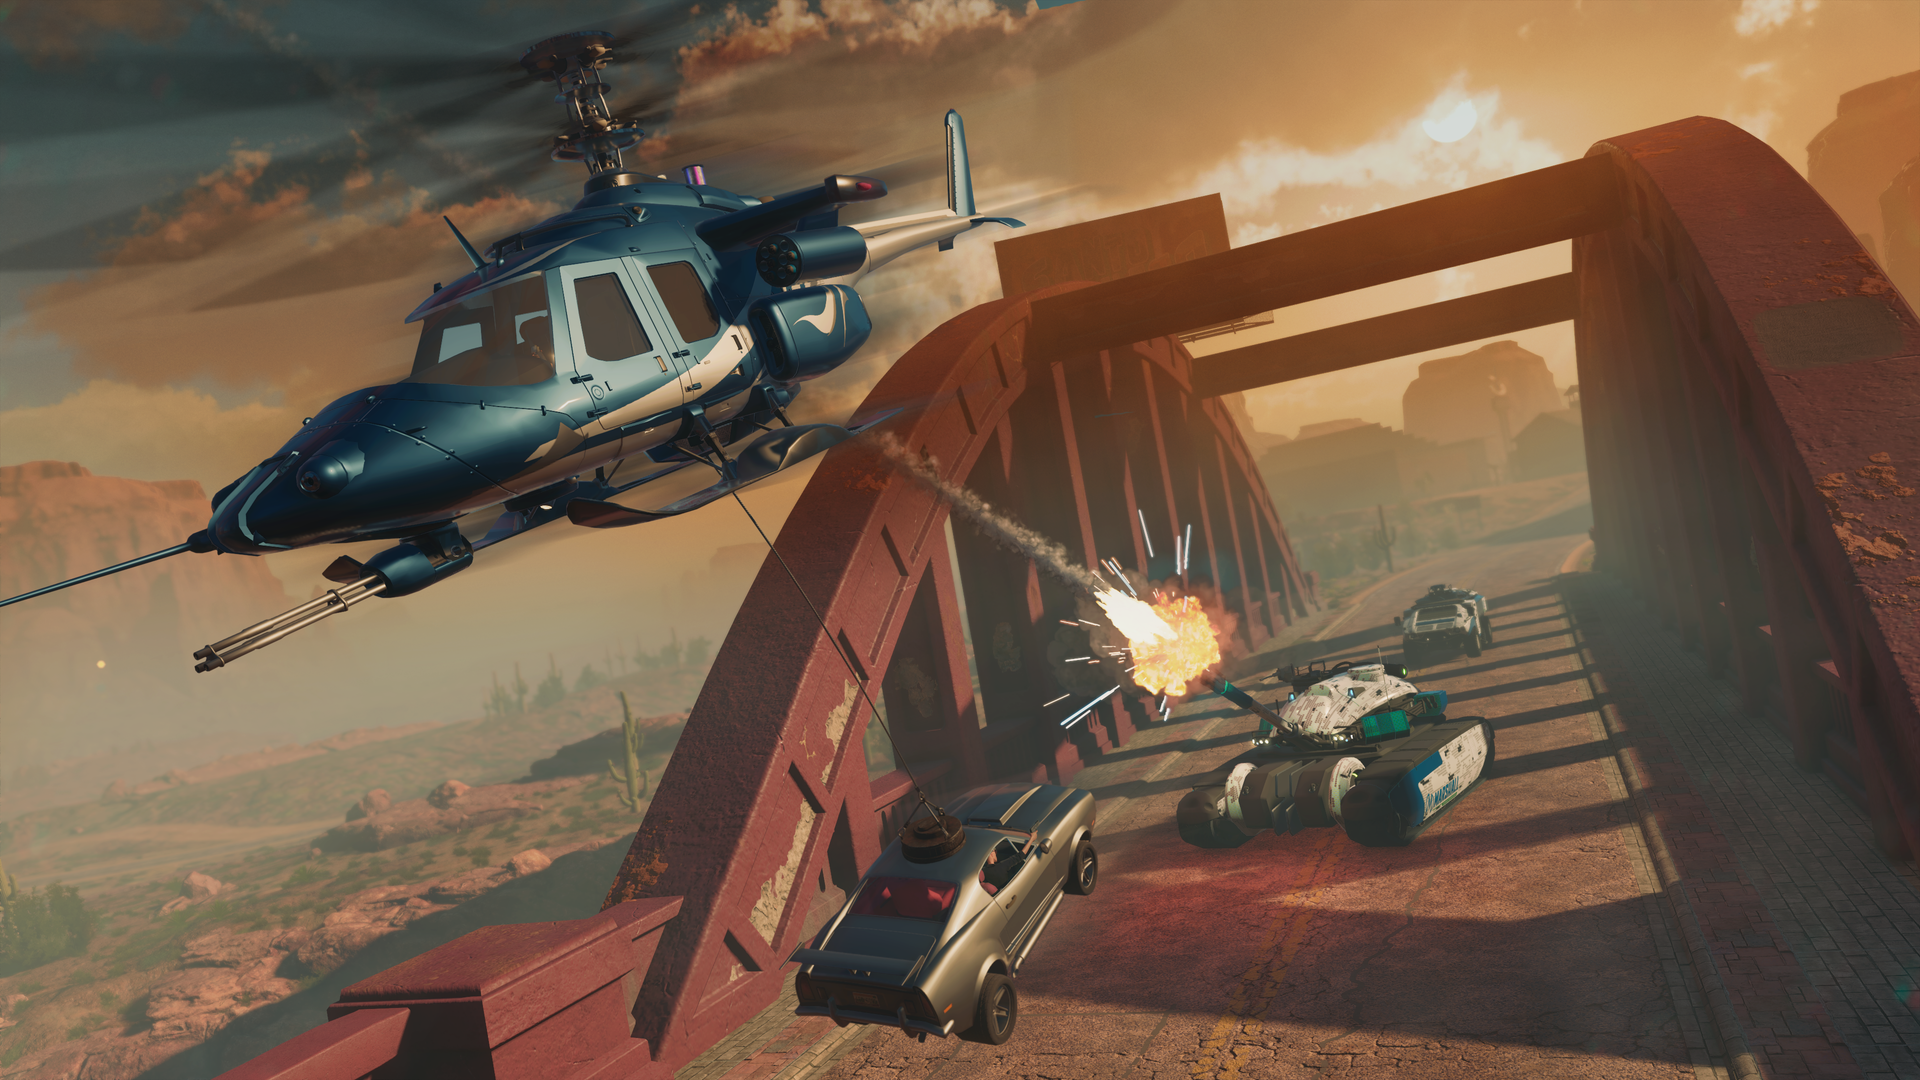 An attack helicopter carries a car on a tether while a tank shoots at it via Saint Row (2022), Deep Silver